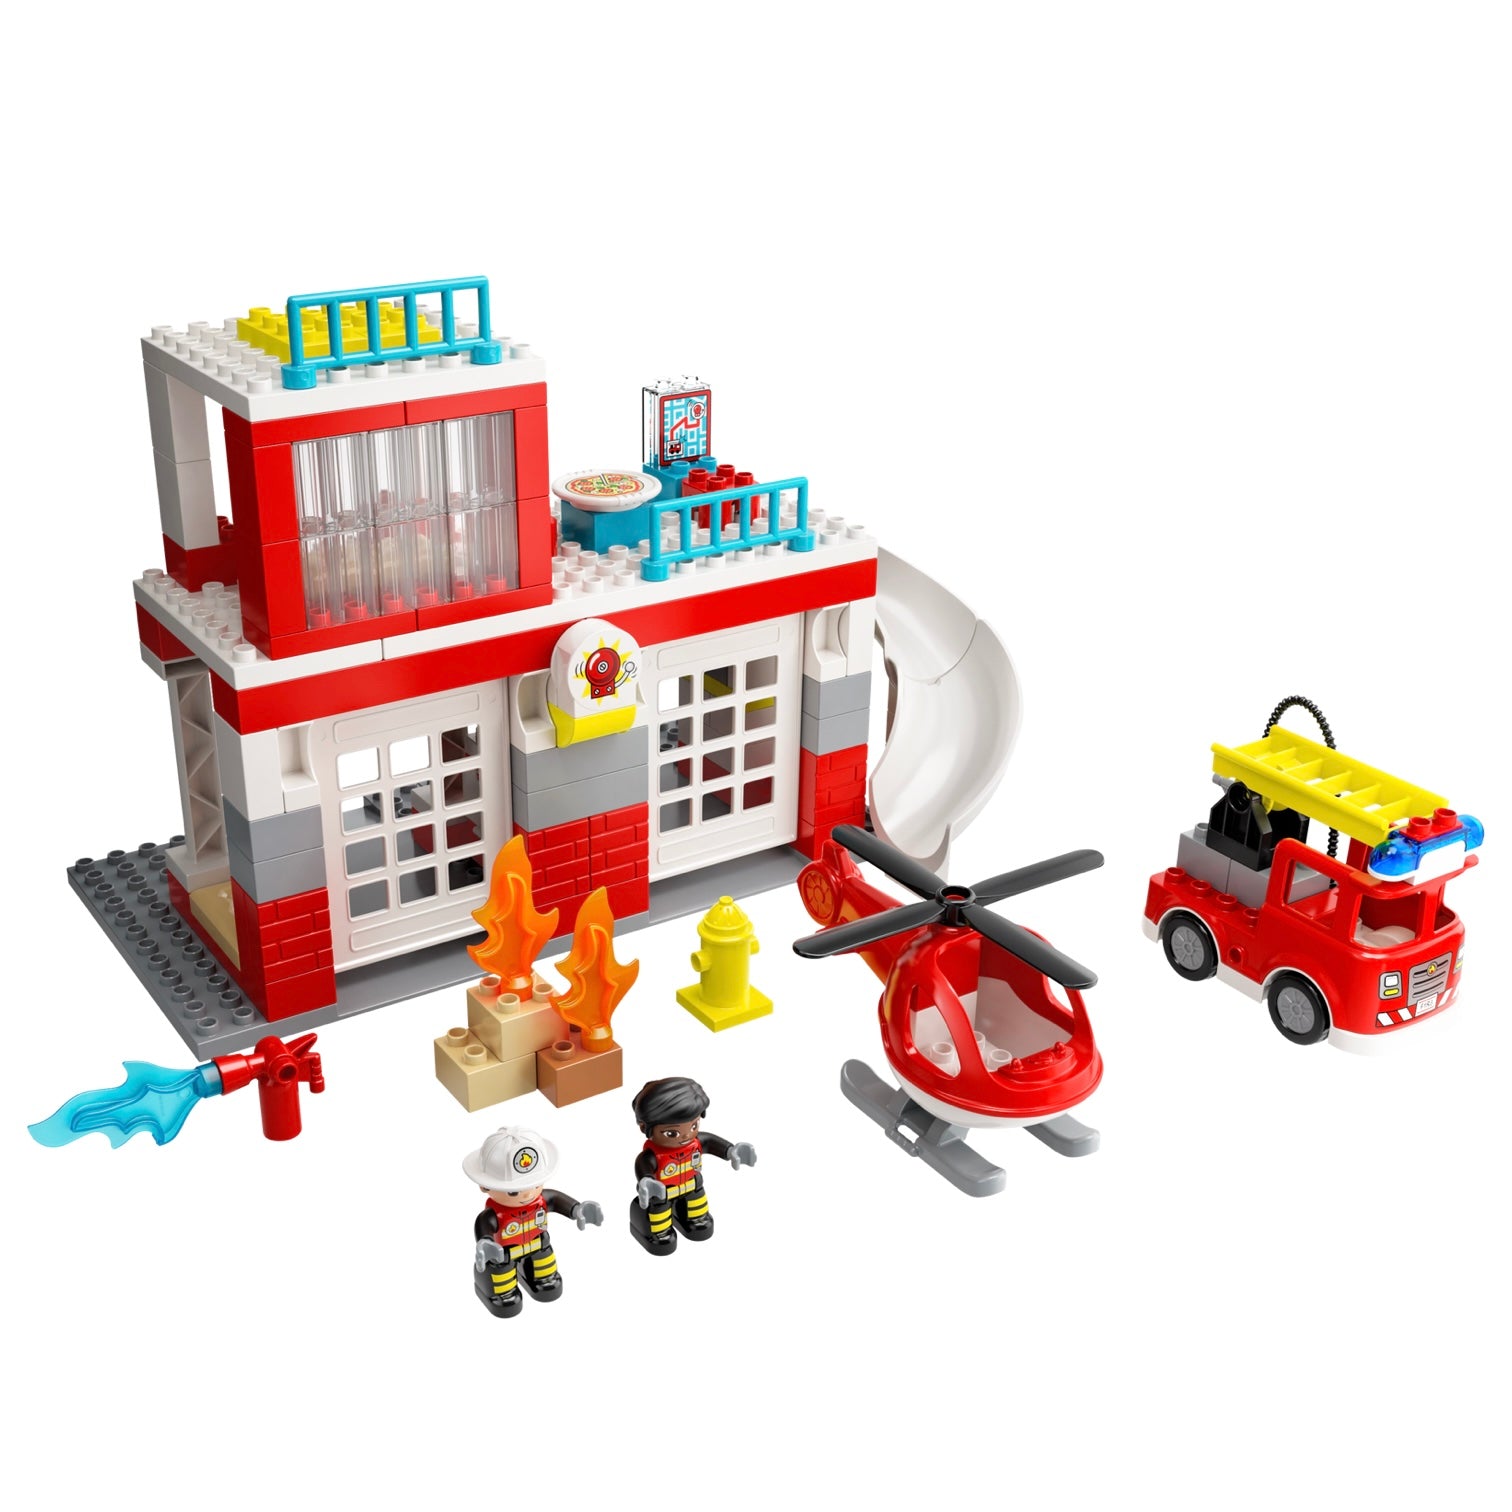 10970 DUPLO Fire Station & Helicopter